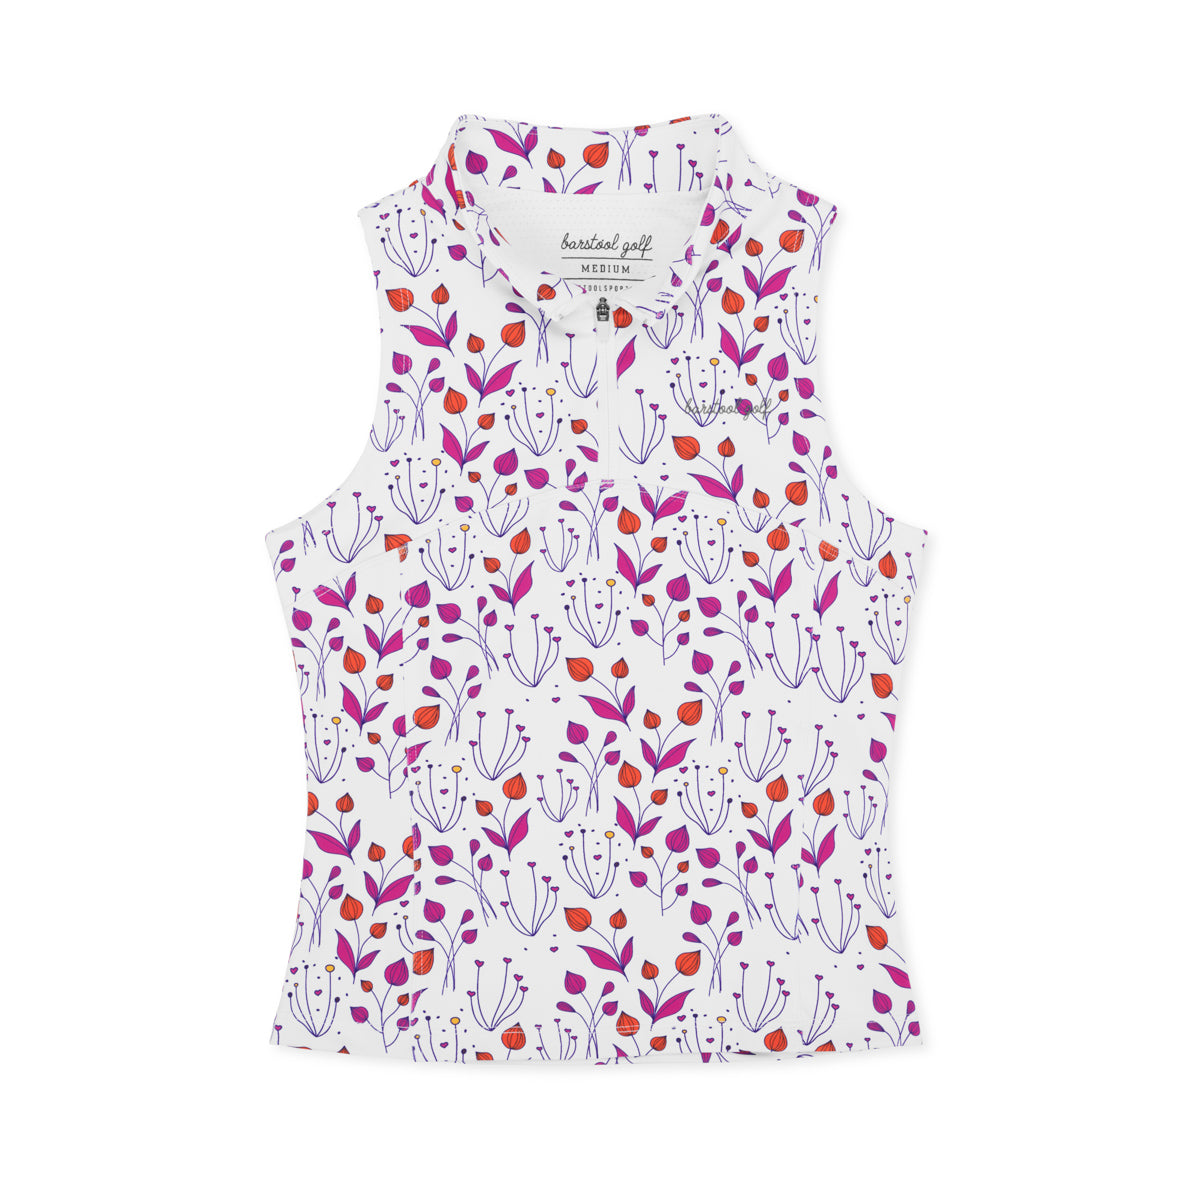 Barstool Golf Women's Floral Sleeveless Top II-T-Shirts-Fore Play-Barstool Sports